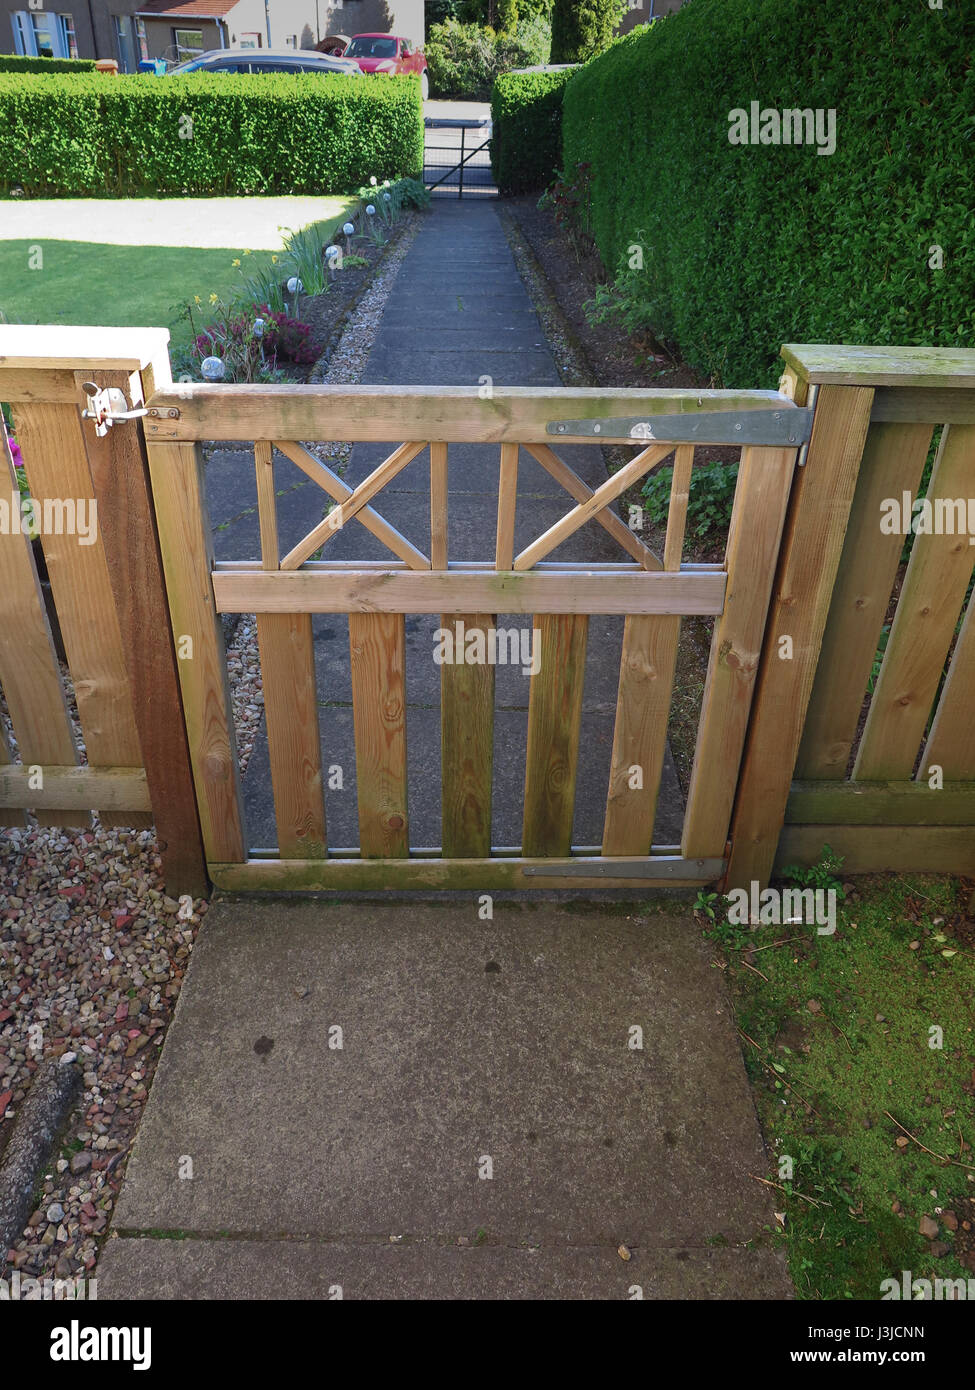 Wooden garden gate and path Stock Photo